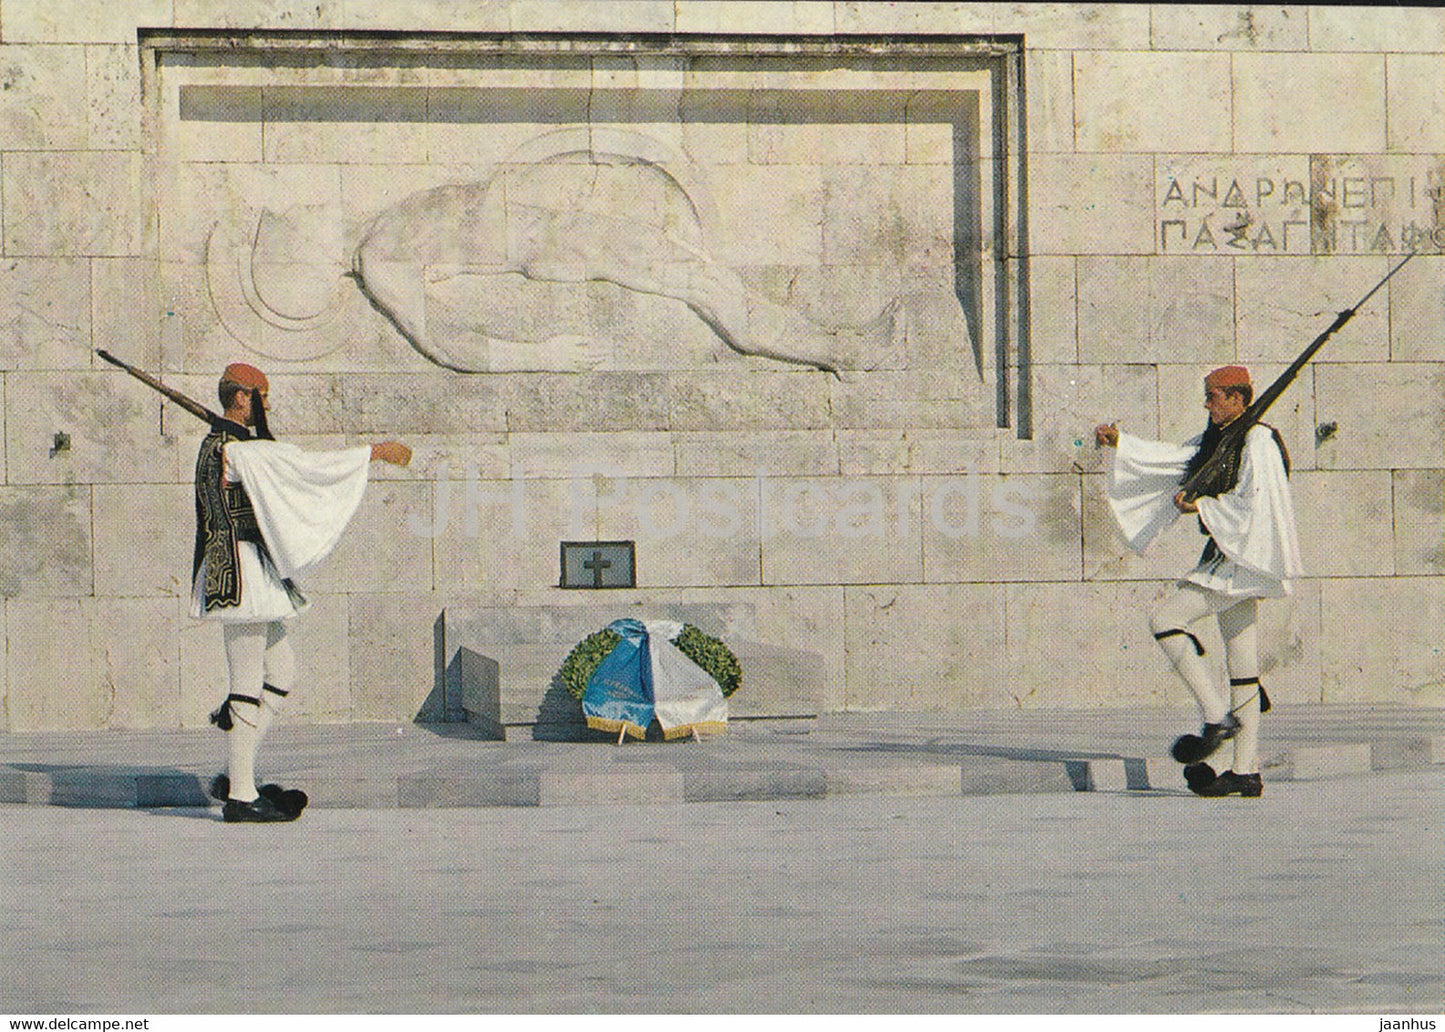 Athens - Euzones Soldiers - 1985 - Greece - used - JH Postcards